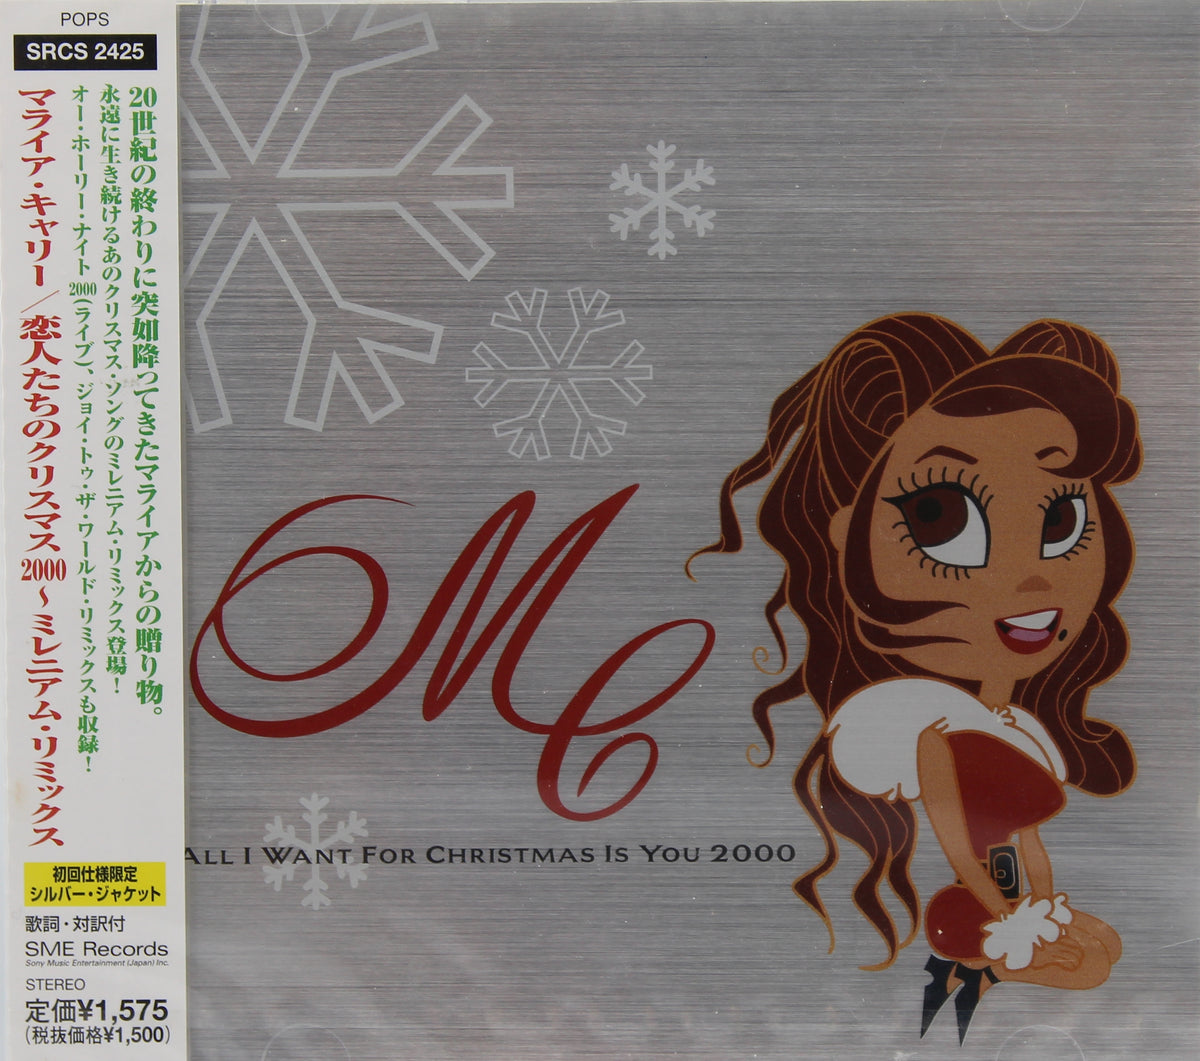 Mariah Carey ‎– All I Want For Christmas Is You 2000,  CD, Maxi-Single, Japan 2000